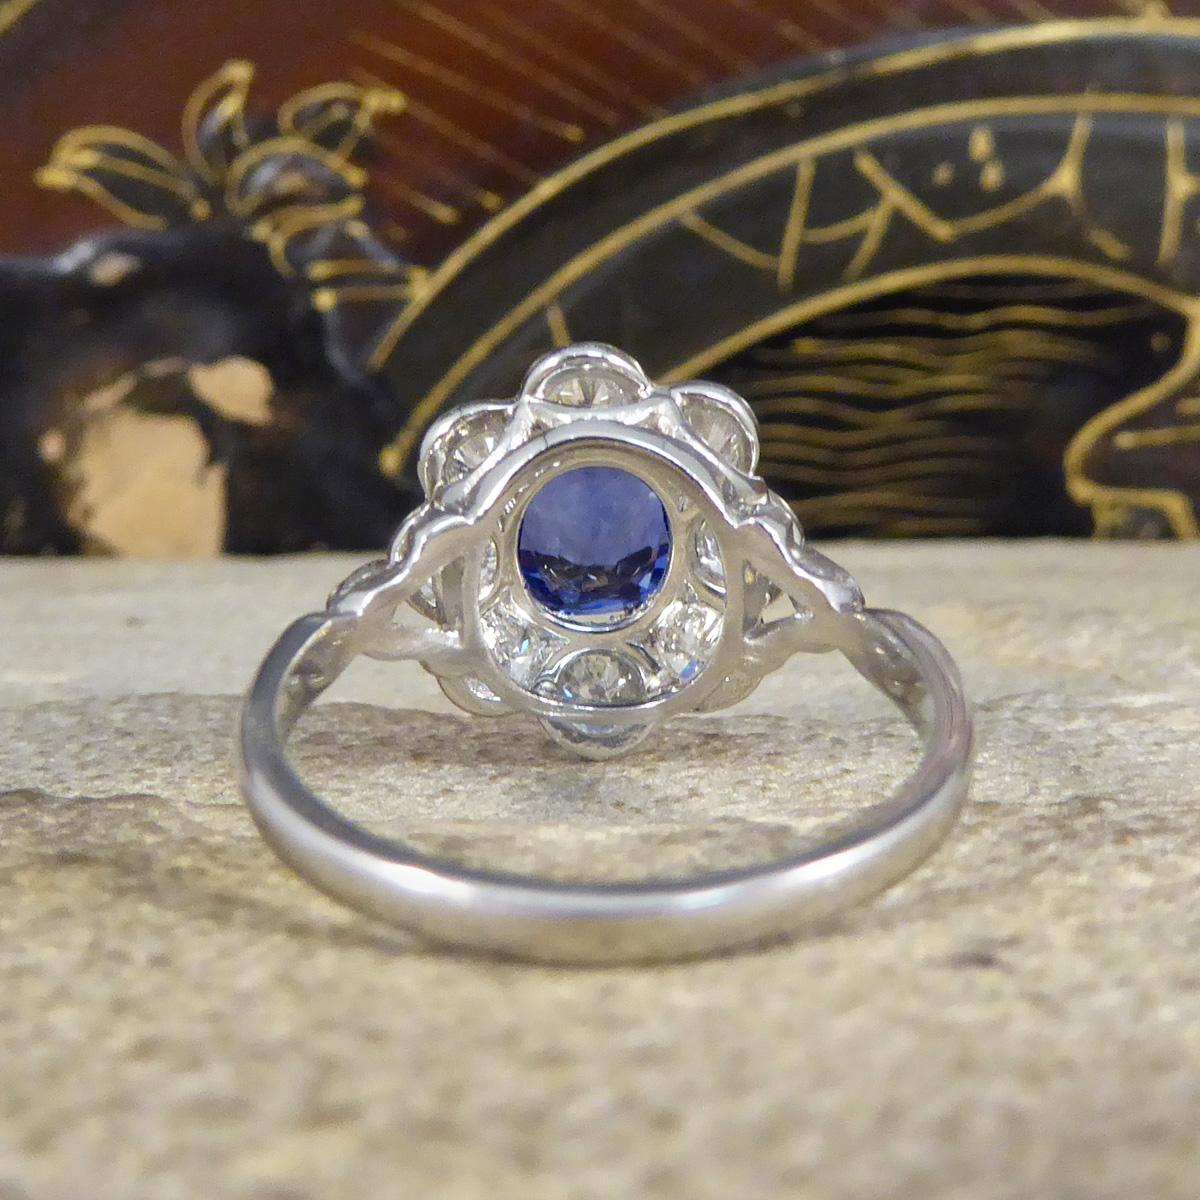 Edwardian Style 1.50ct Sapphire and 1.10ct Diamond Cluster Ring in Platinum In Excellent Condition For Sale In Yorkshire, West Yorkshire